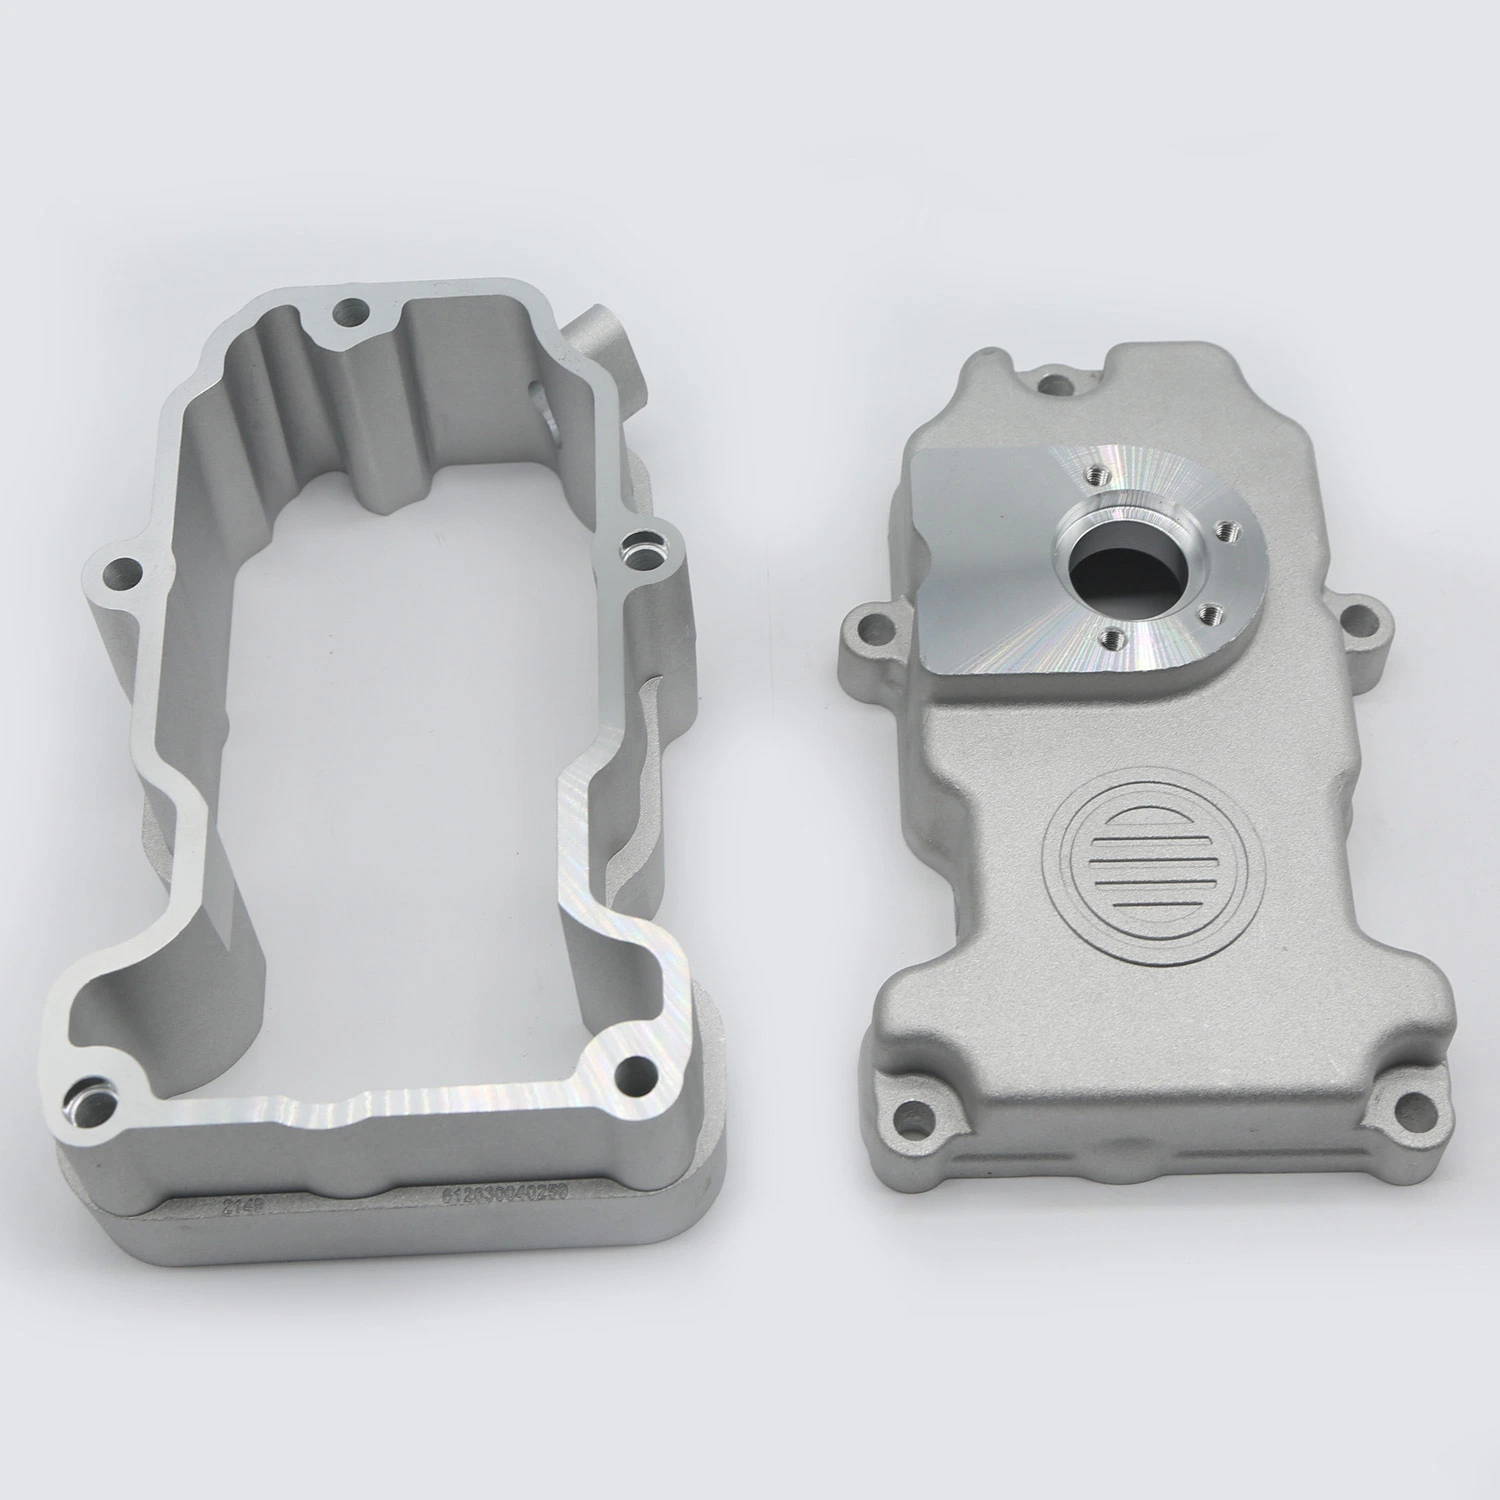 Aluminum Alloy Die Casting Auto Spare Parts Custom Aluminum Die Casting Part Aluminum Bicycle Accessories High quality/High cost performance High Precision